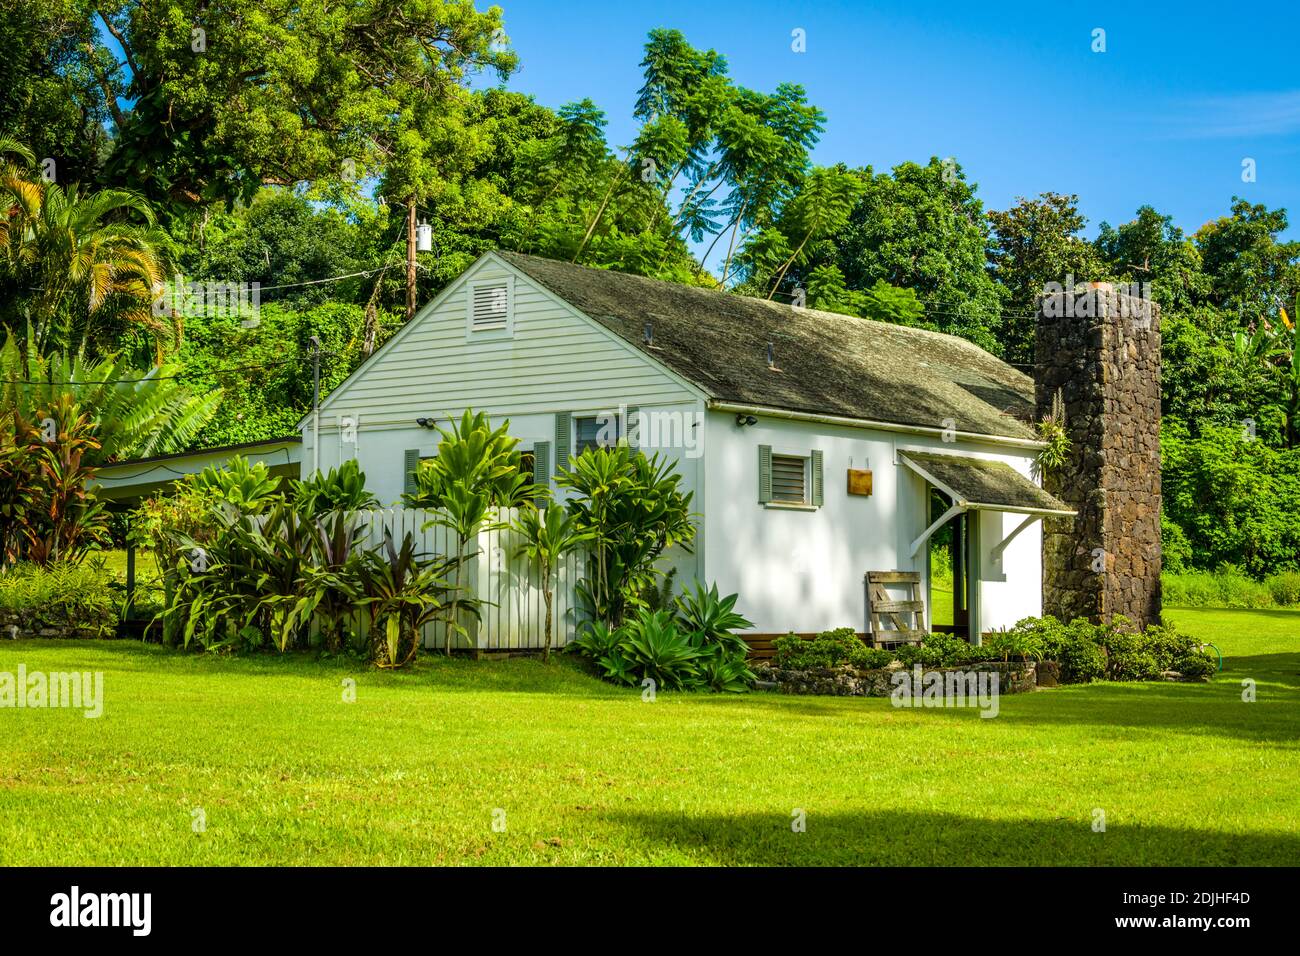 Maui, Hawaii, Upcountry, MauiWine (formerly known as Tedeshi Winery), Pavilion Stock Photo